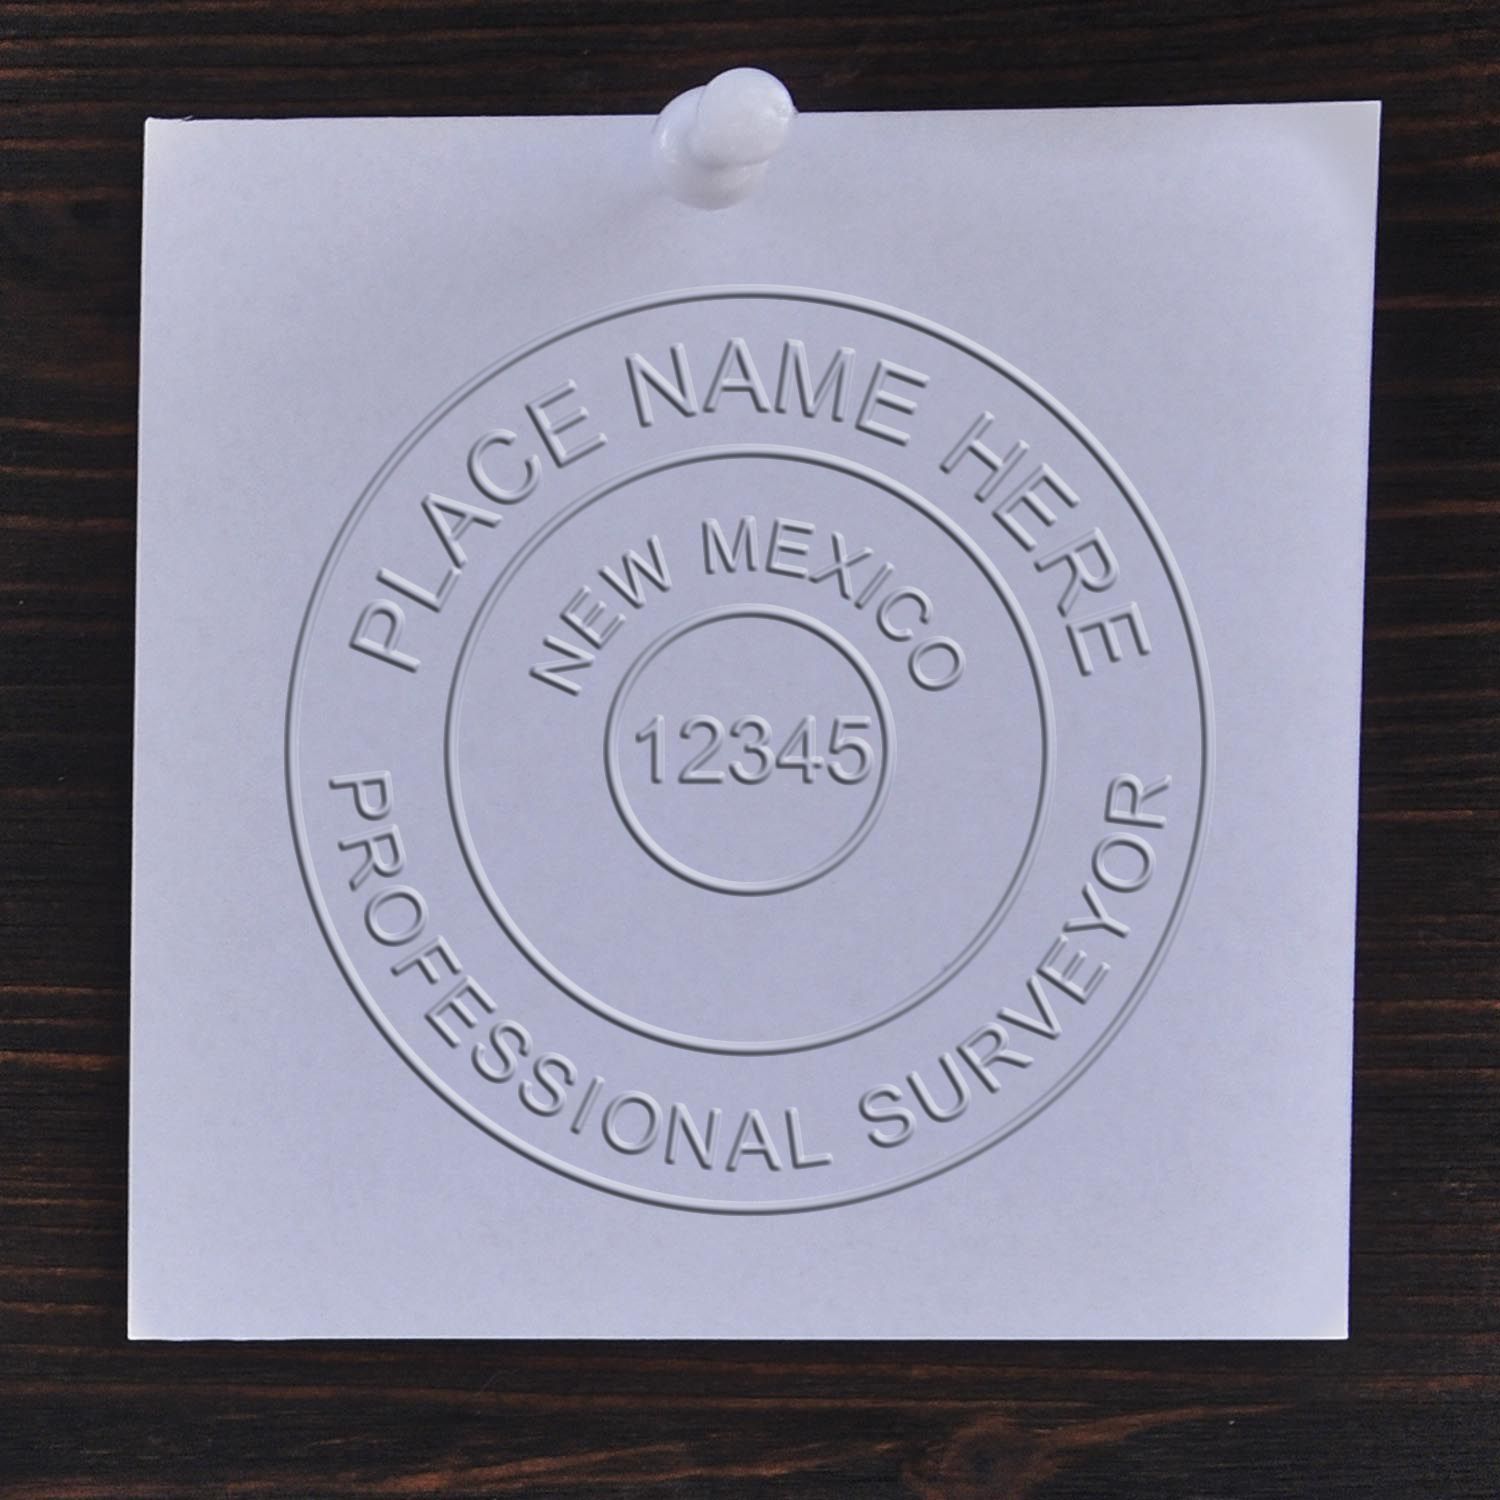 An alternative view of the Heavy Duty Cast Iron New Mexico Land Surveyor Seal Embosser stamped on a sheet of paper showing the image in use